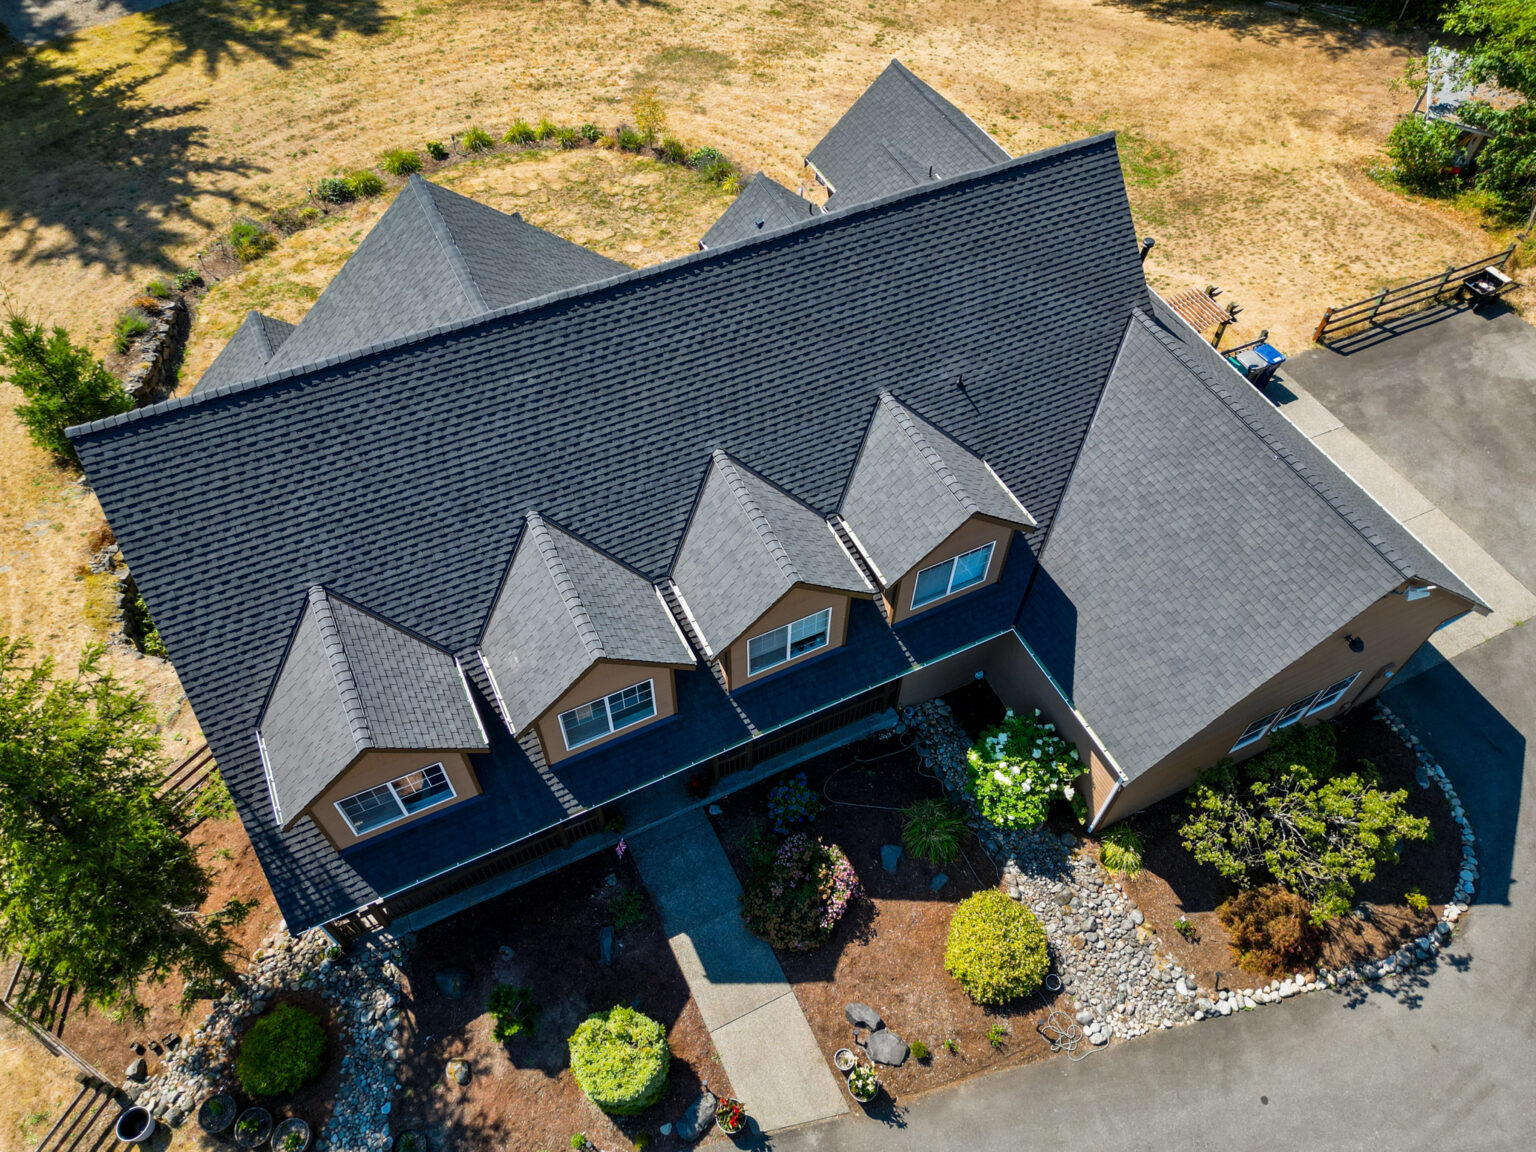 Multi-structure Residential Composite Shingles Roof in Ravensdale, Washington - Close up of home